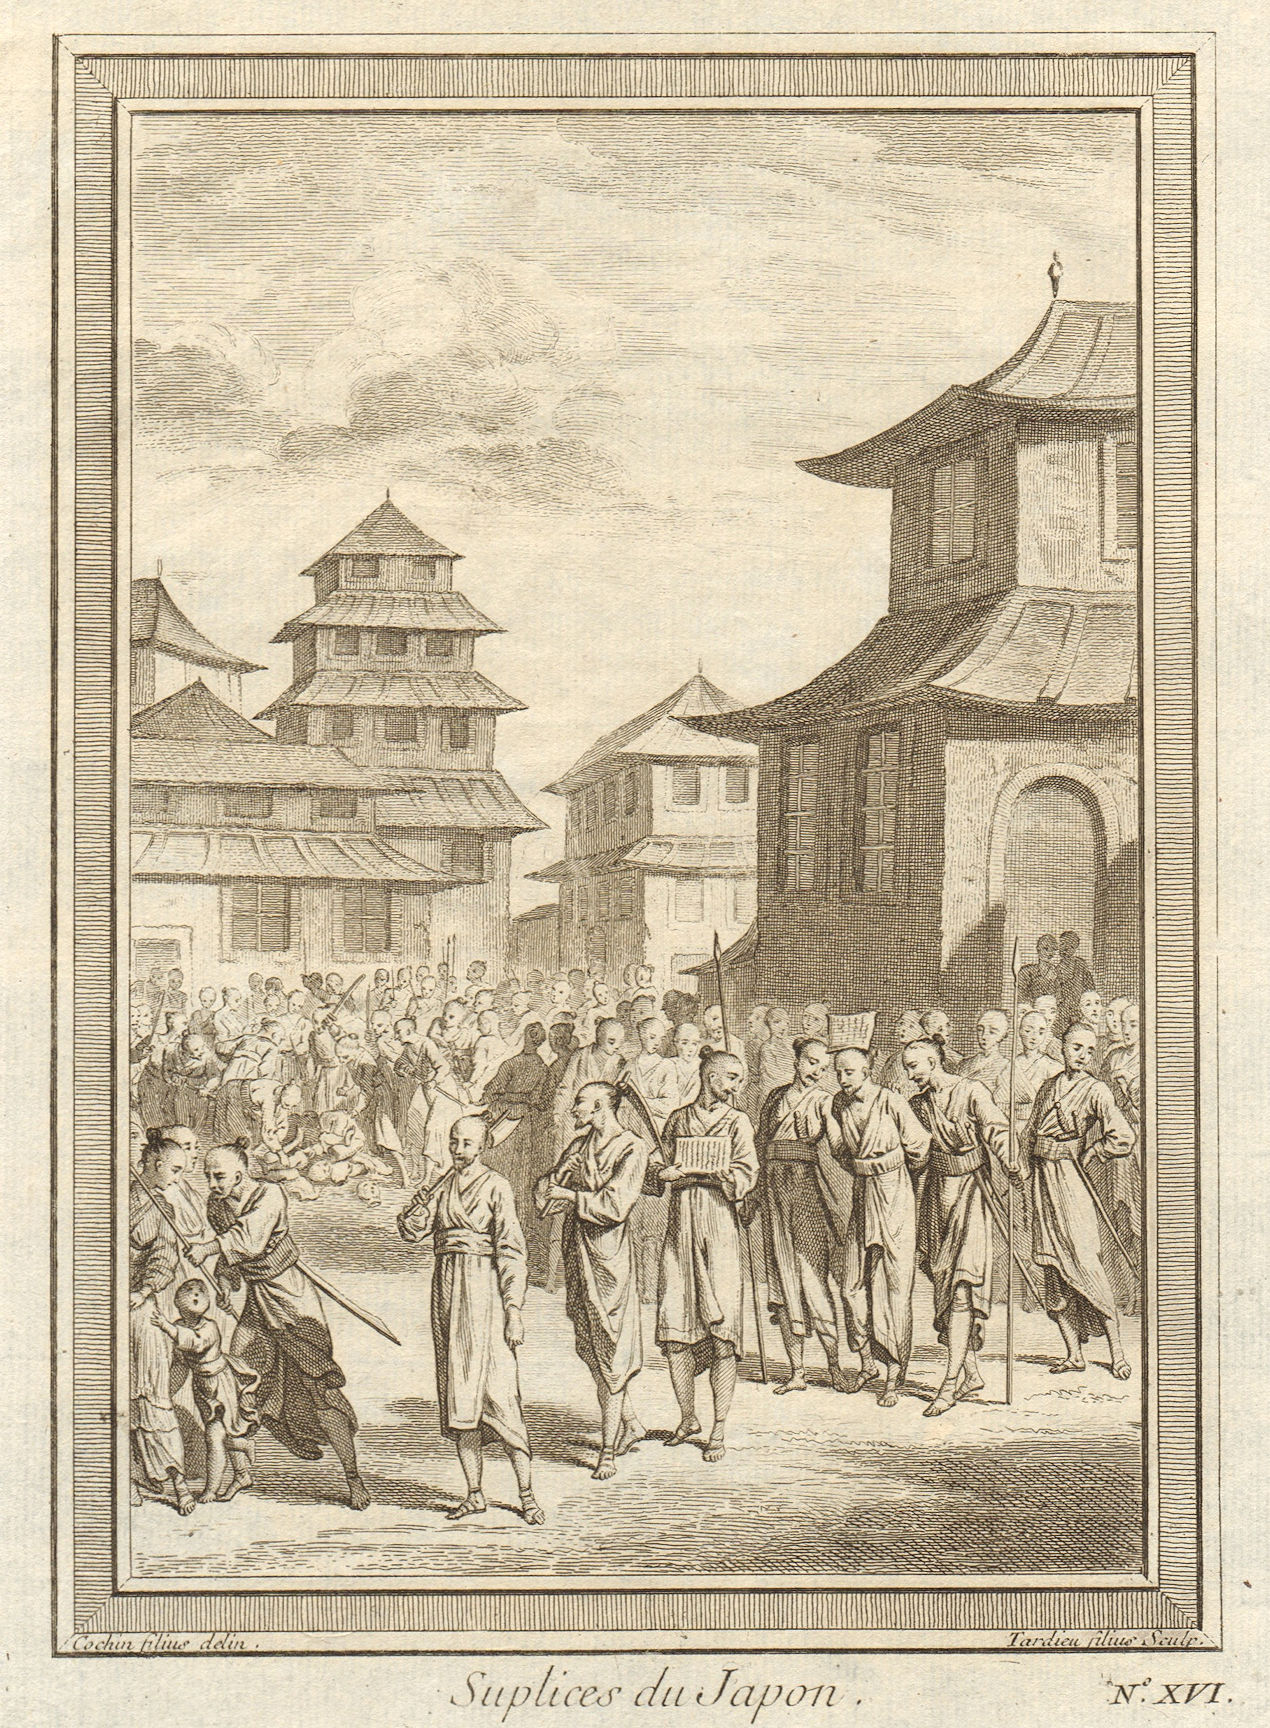 Associate Product 'Suplices du Japon'. Japanese punishments. Execution by sword 1746 old print